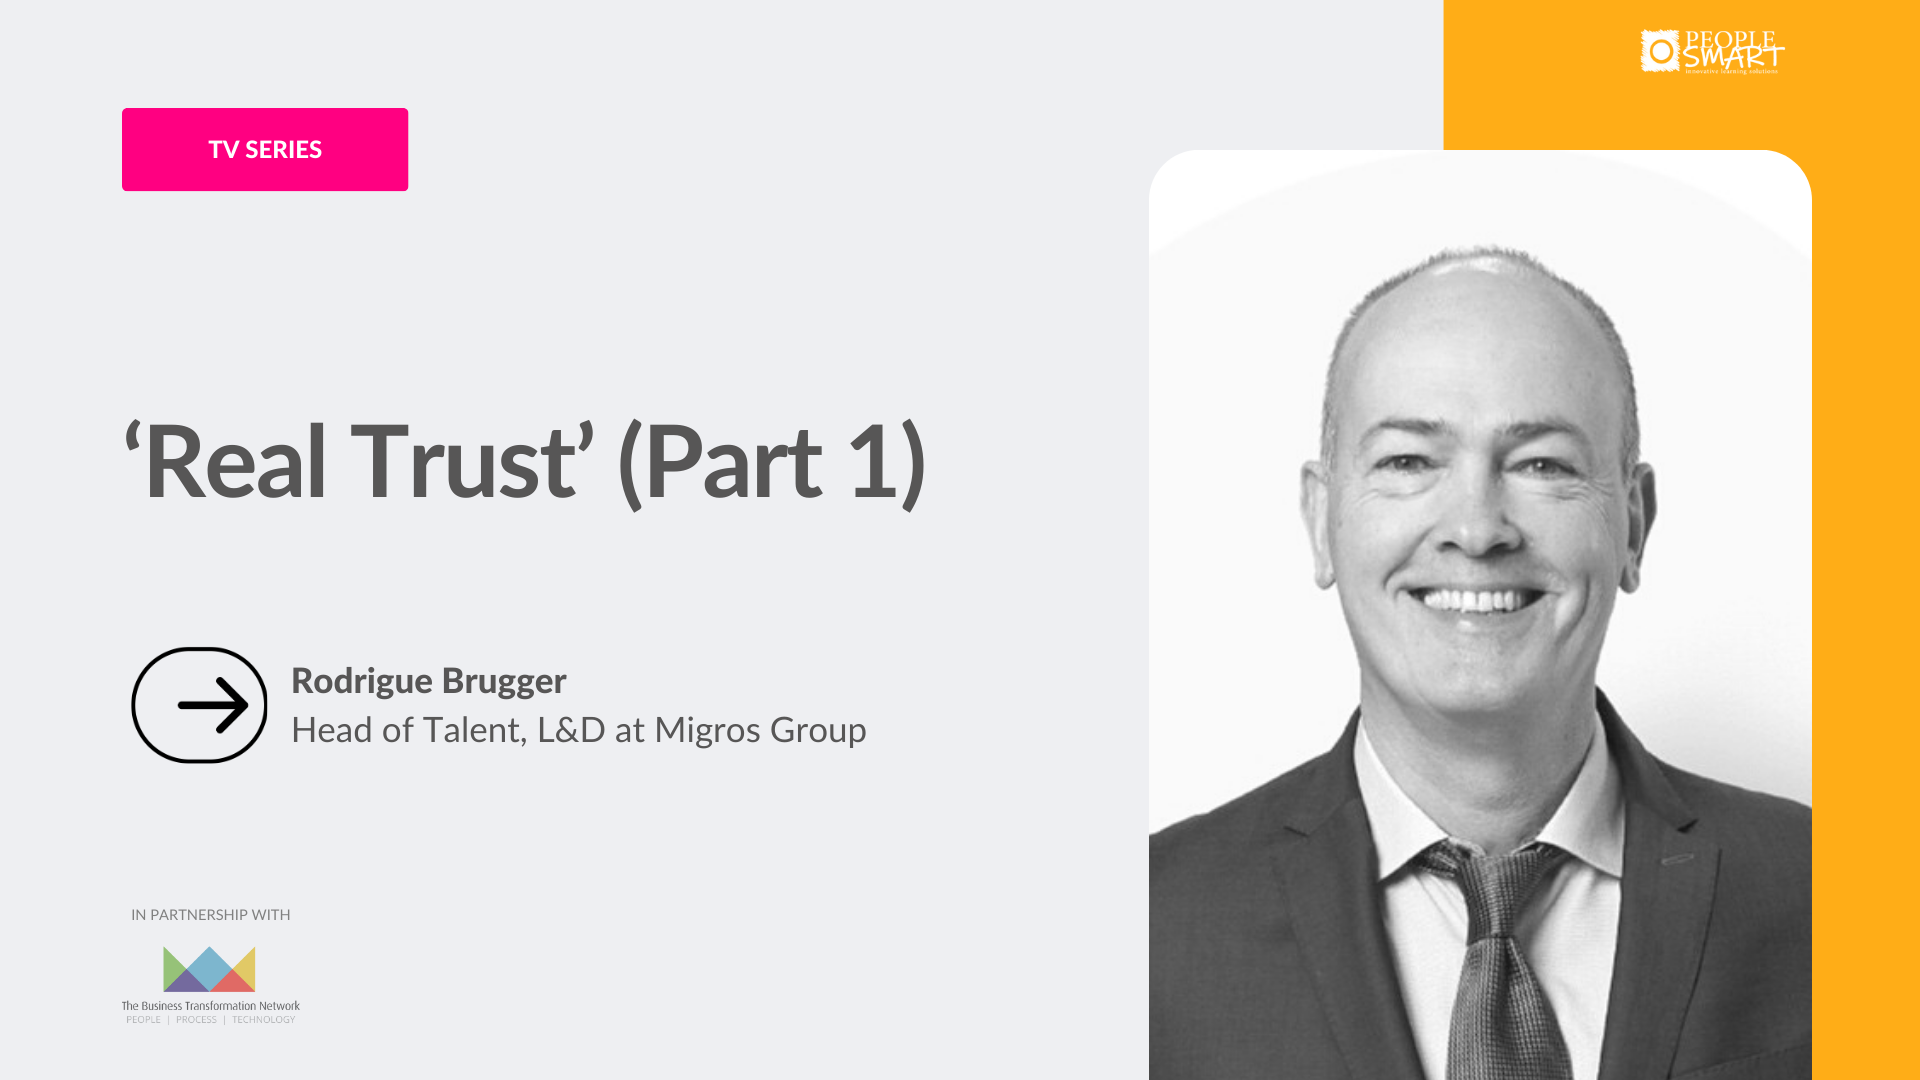 ‘Real Trust’ with Rodrigue Brugger (Part 1)